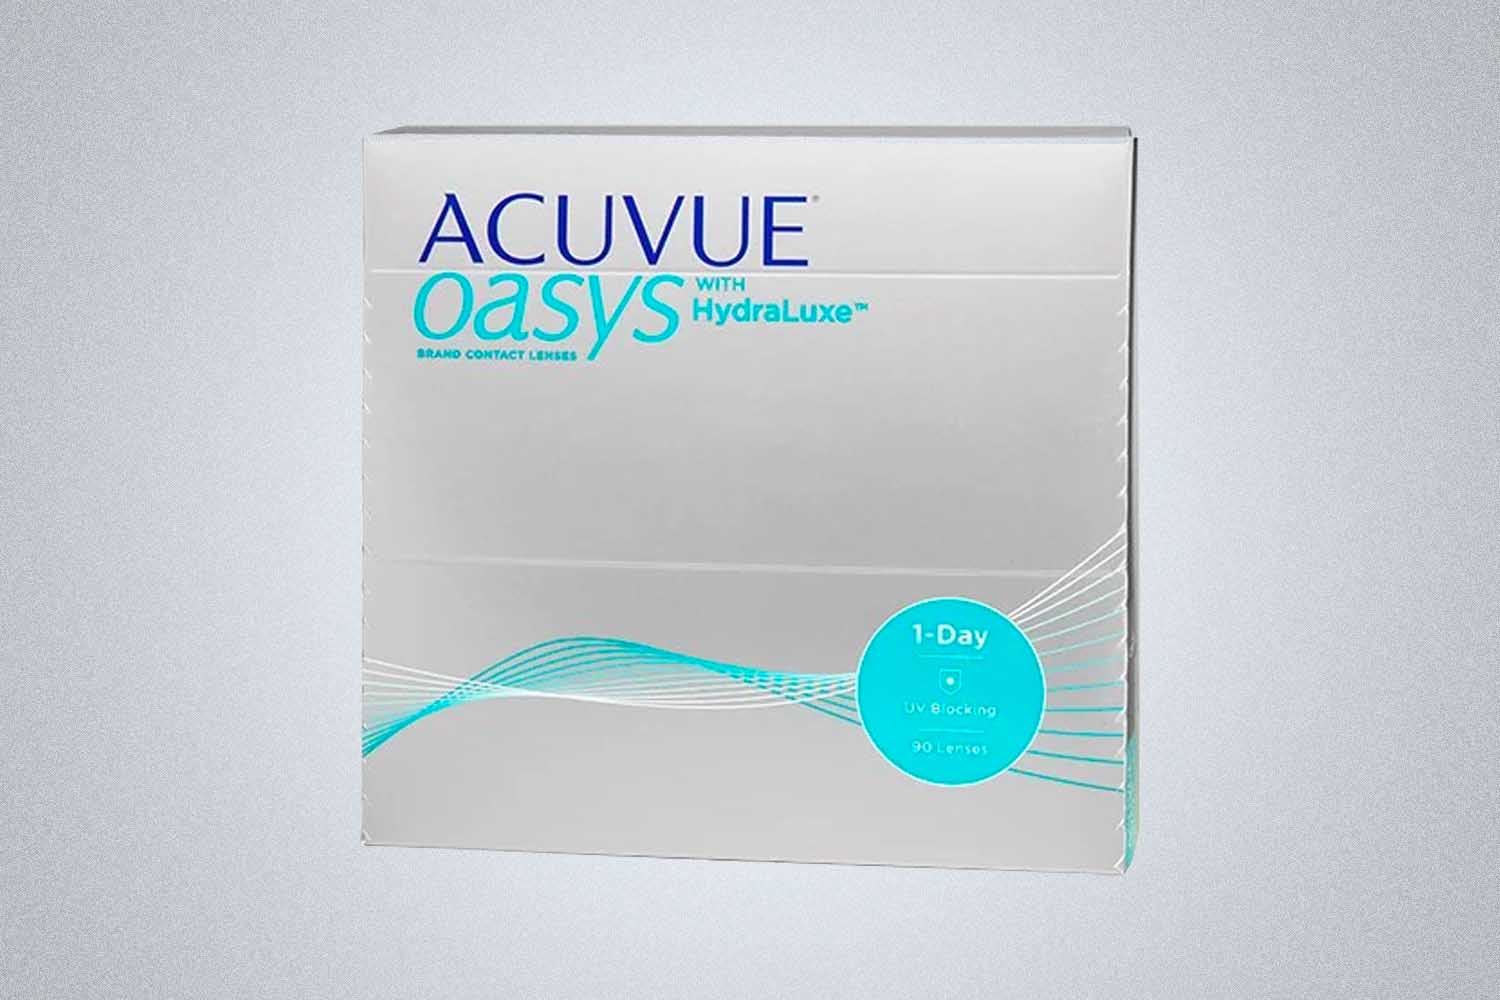 Acuvue contacts, which you can get at the best places to buy contact lenses online